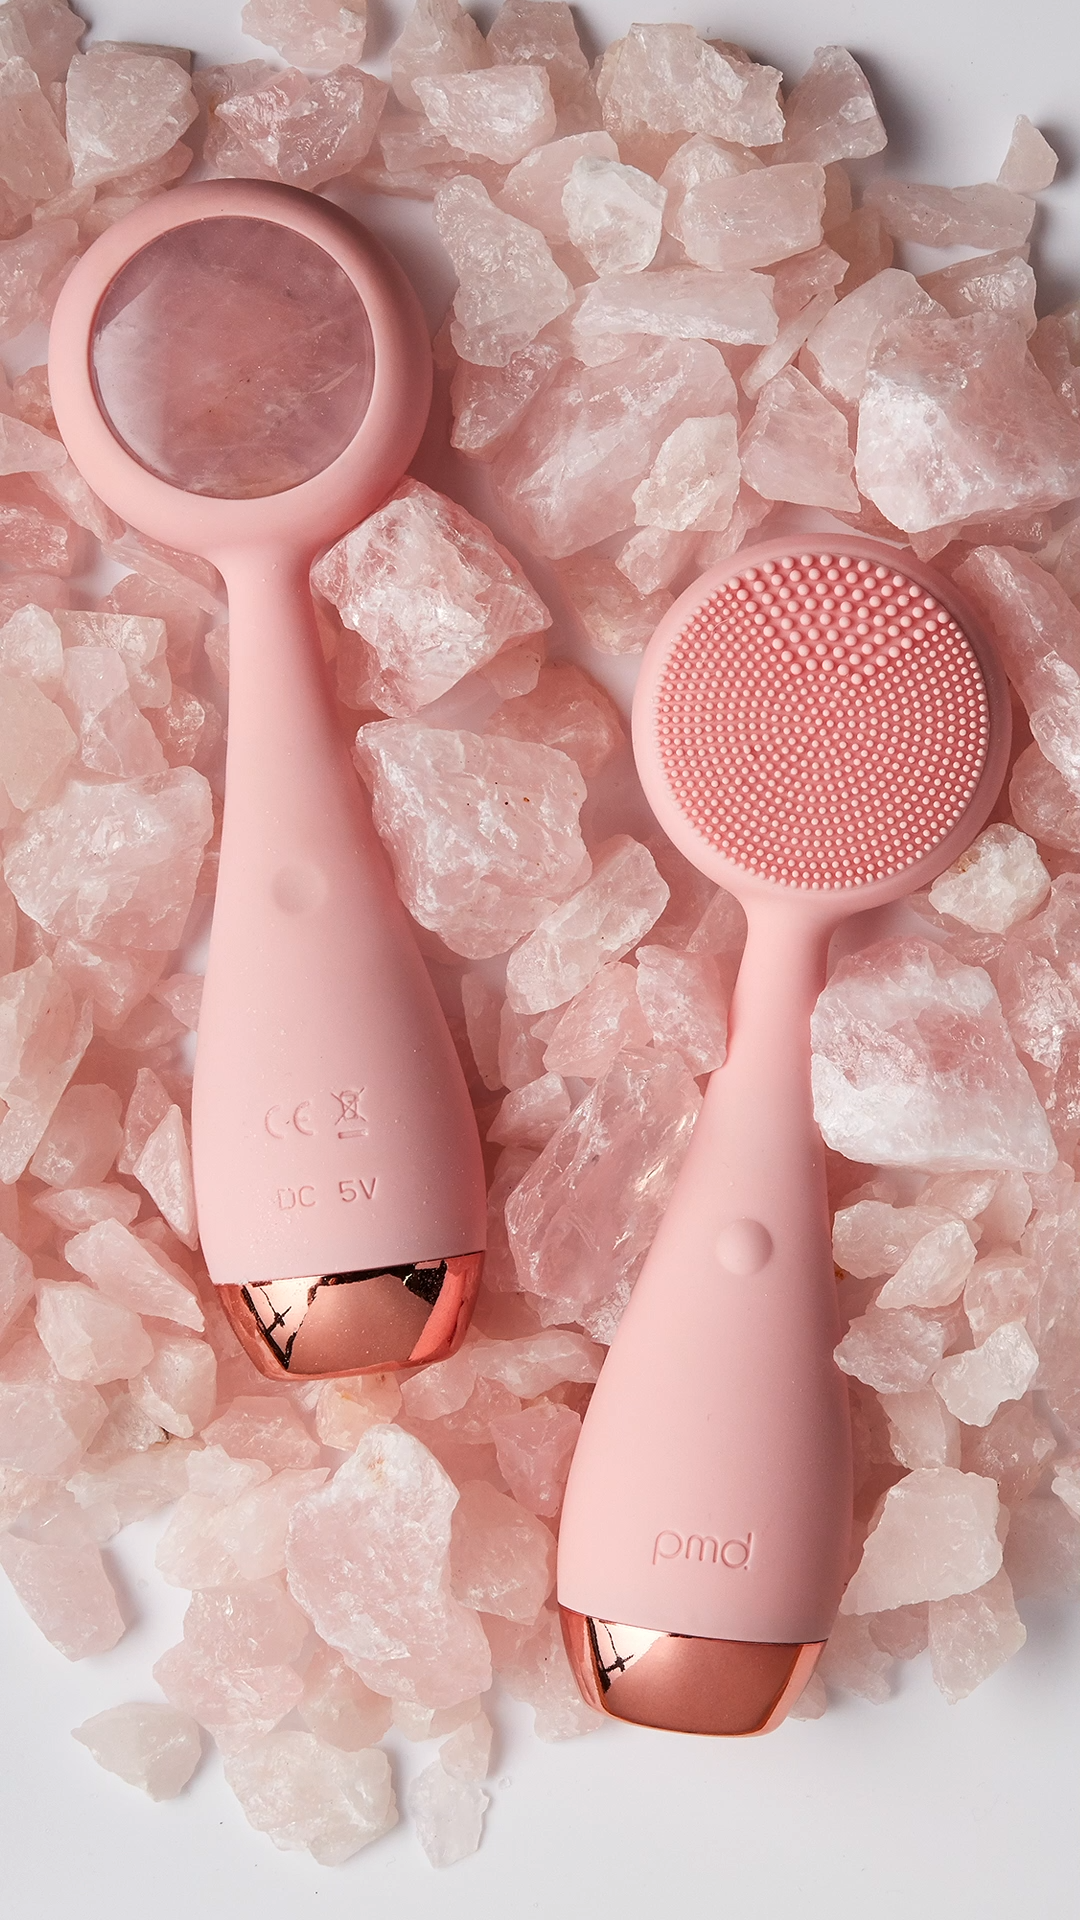 Rose Quartz Facial with the PMD Clean Pro RQ - Rose Quartz Facial with the PMD Clean Pro RQ -   14 beauty Tips instagram ideas